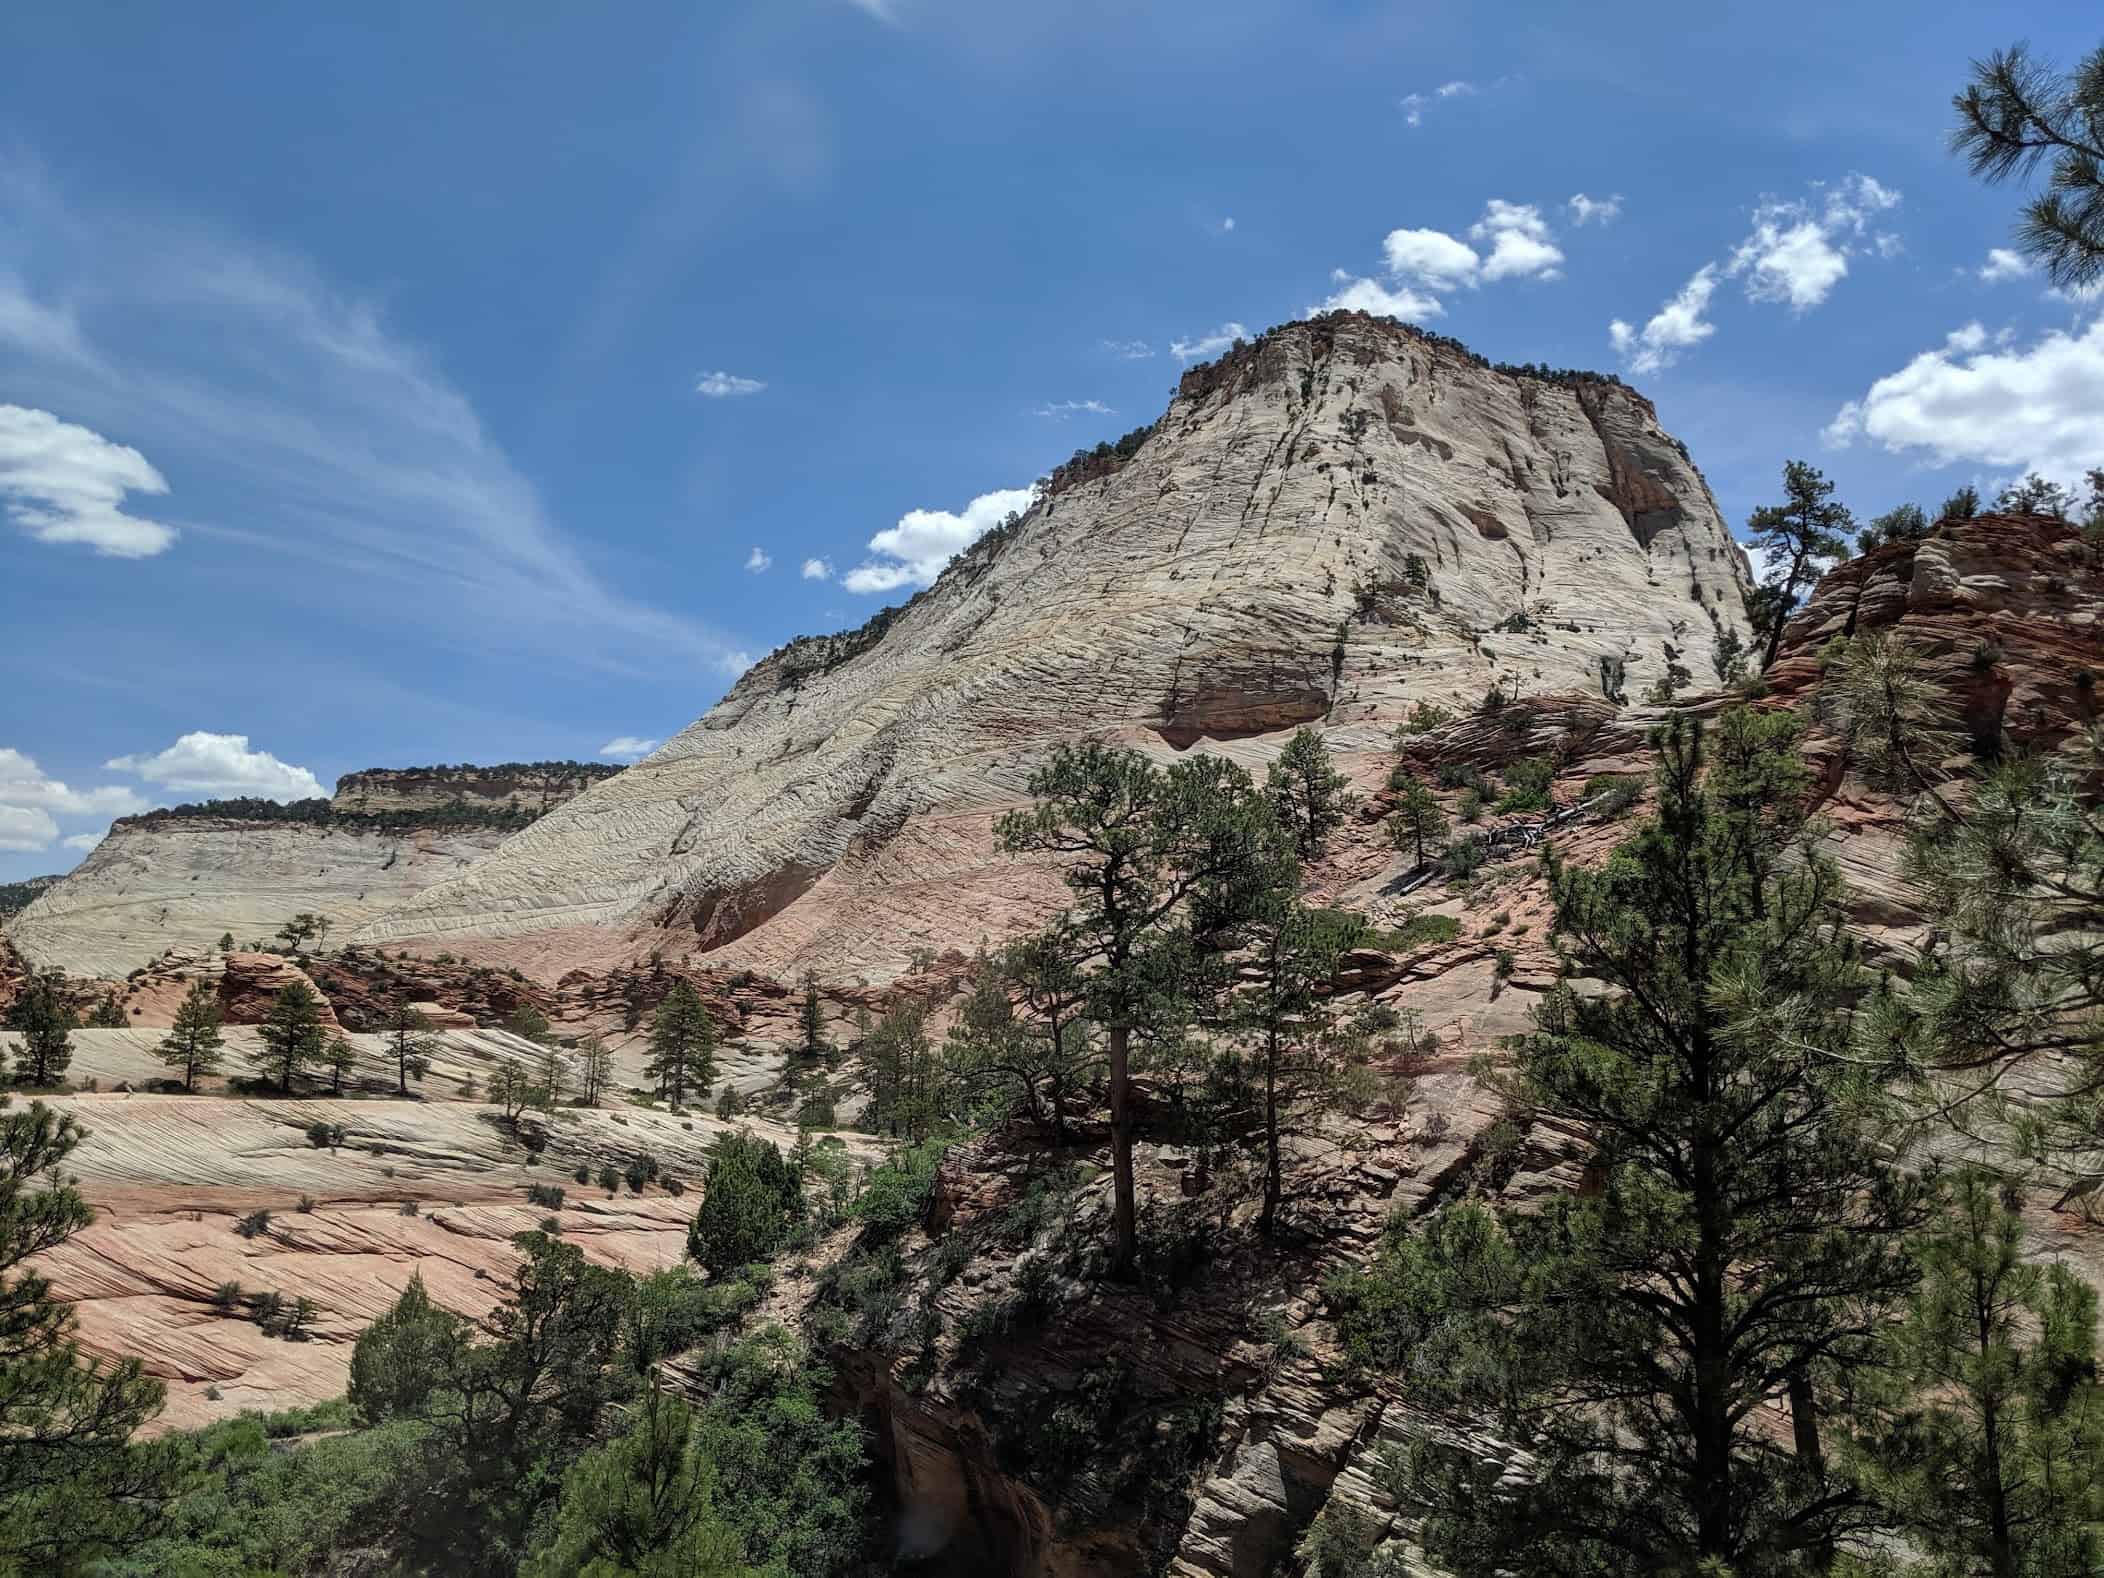 Should you visit East Zion National Park? Yes!